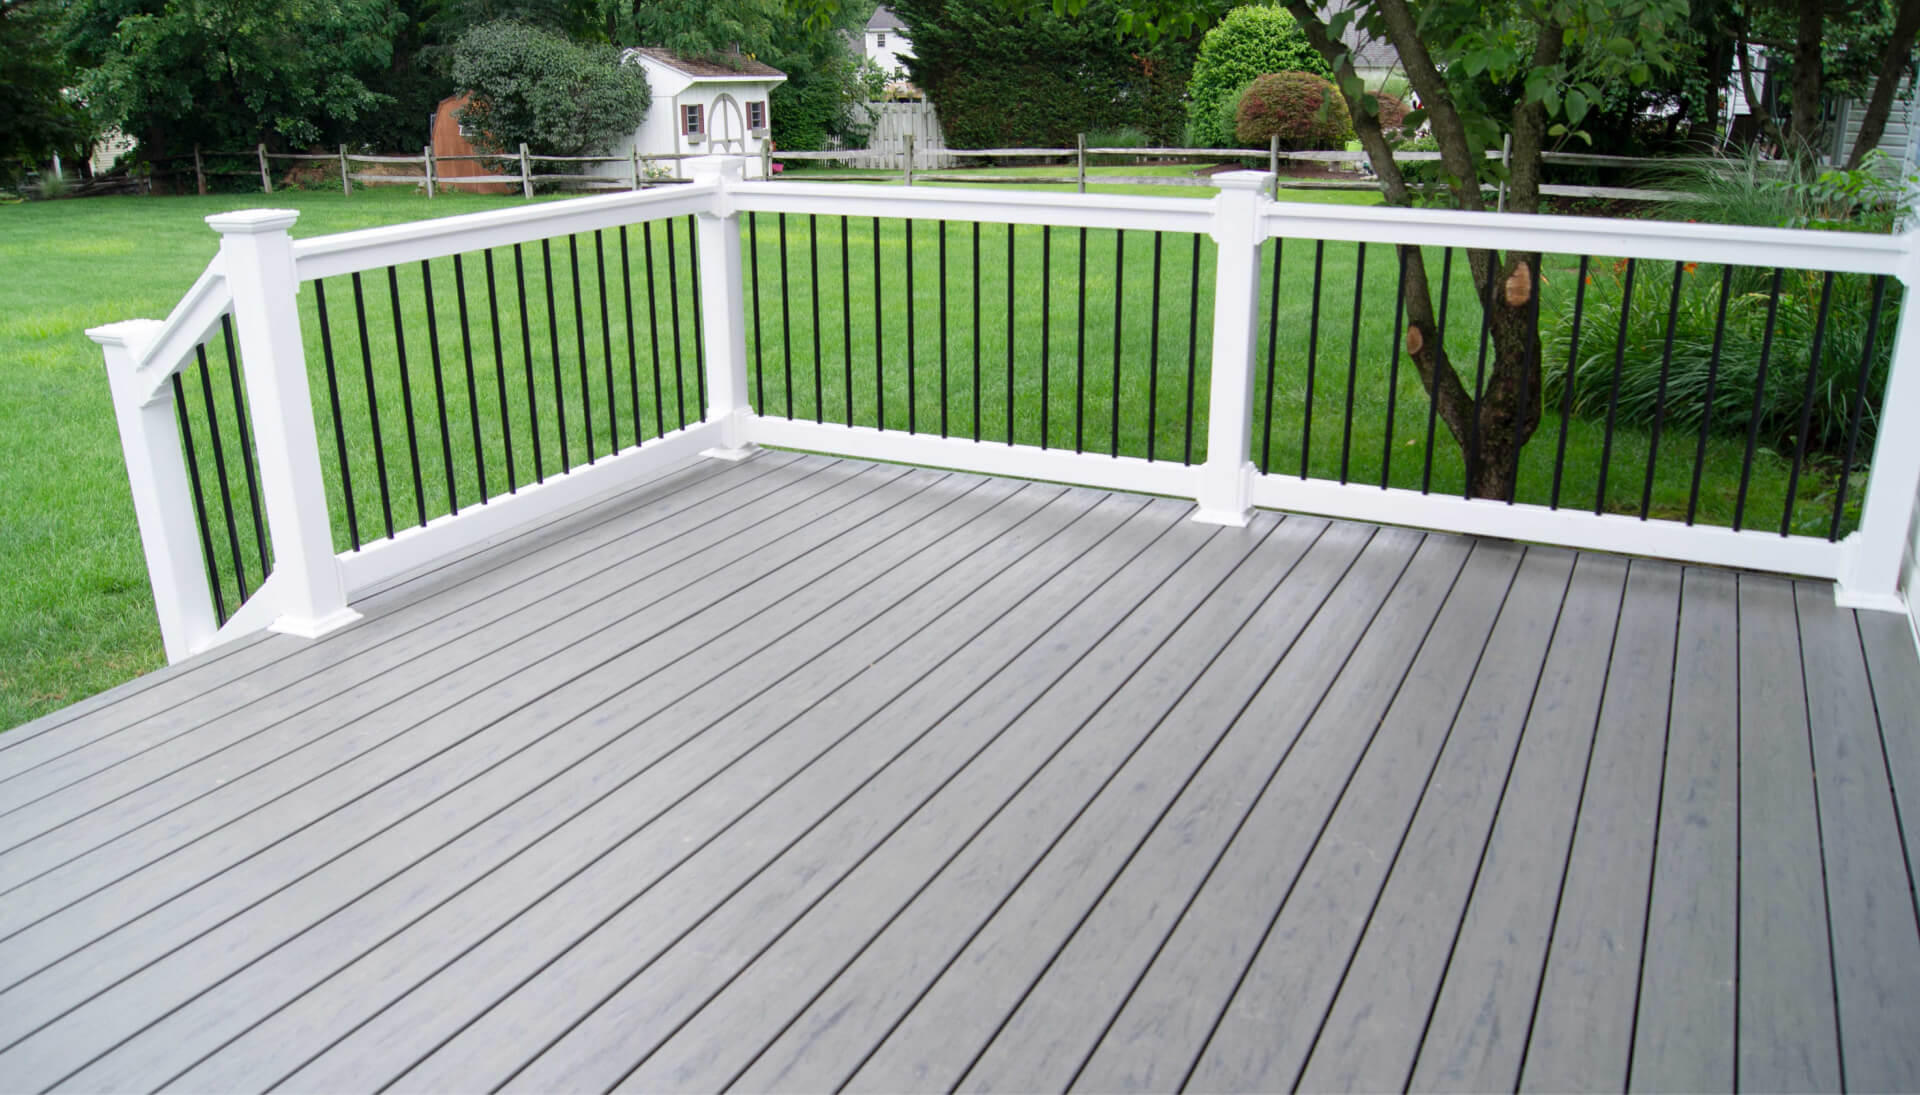 Upgrade Your Kalamazoo, MI Deck with Our Expert Deck Builders Customized Railing and Covers